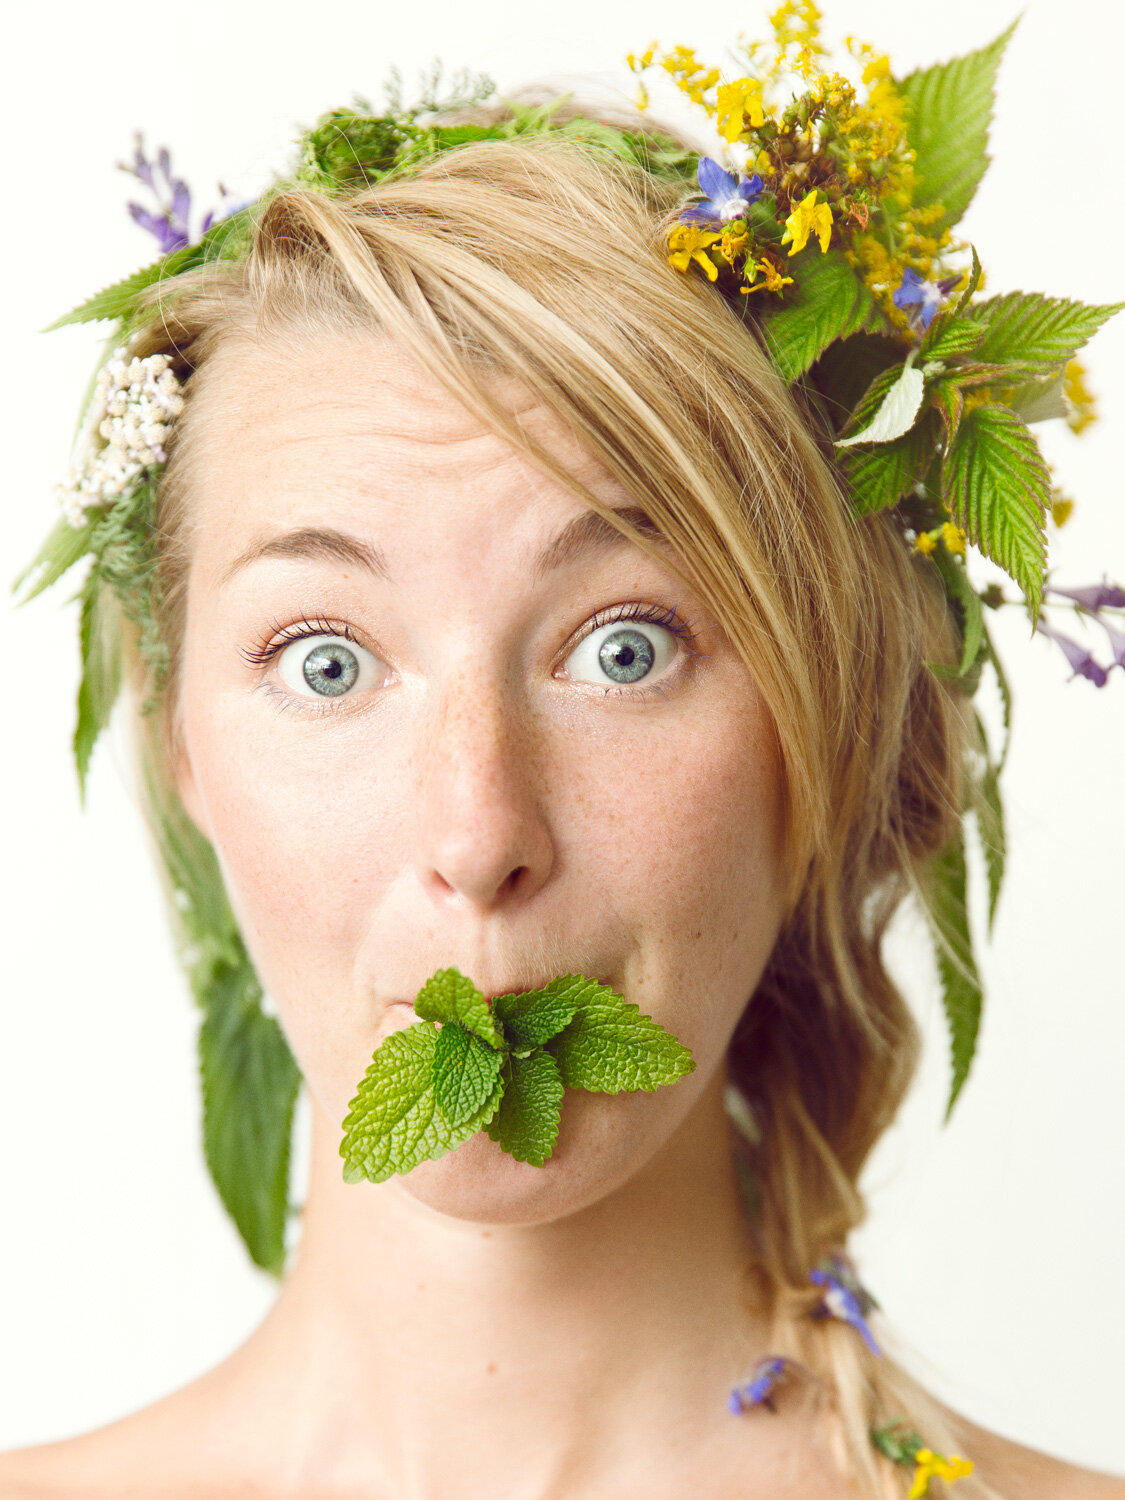 quirky portrait of herbalist woman with herbal crown making silly face with mint in mouth by portrait photographer Hanna Agar